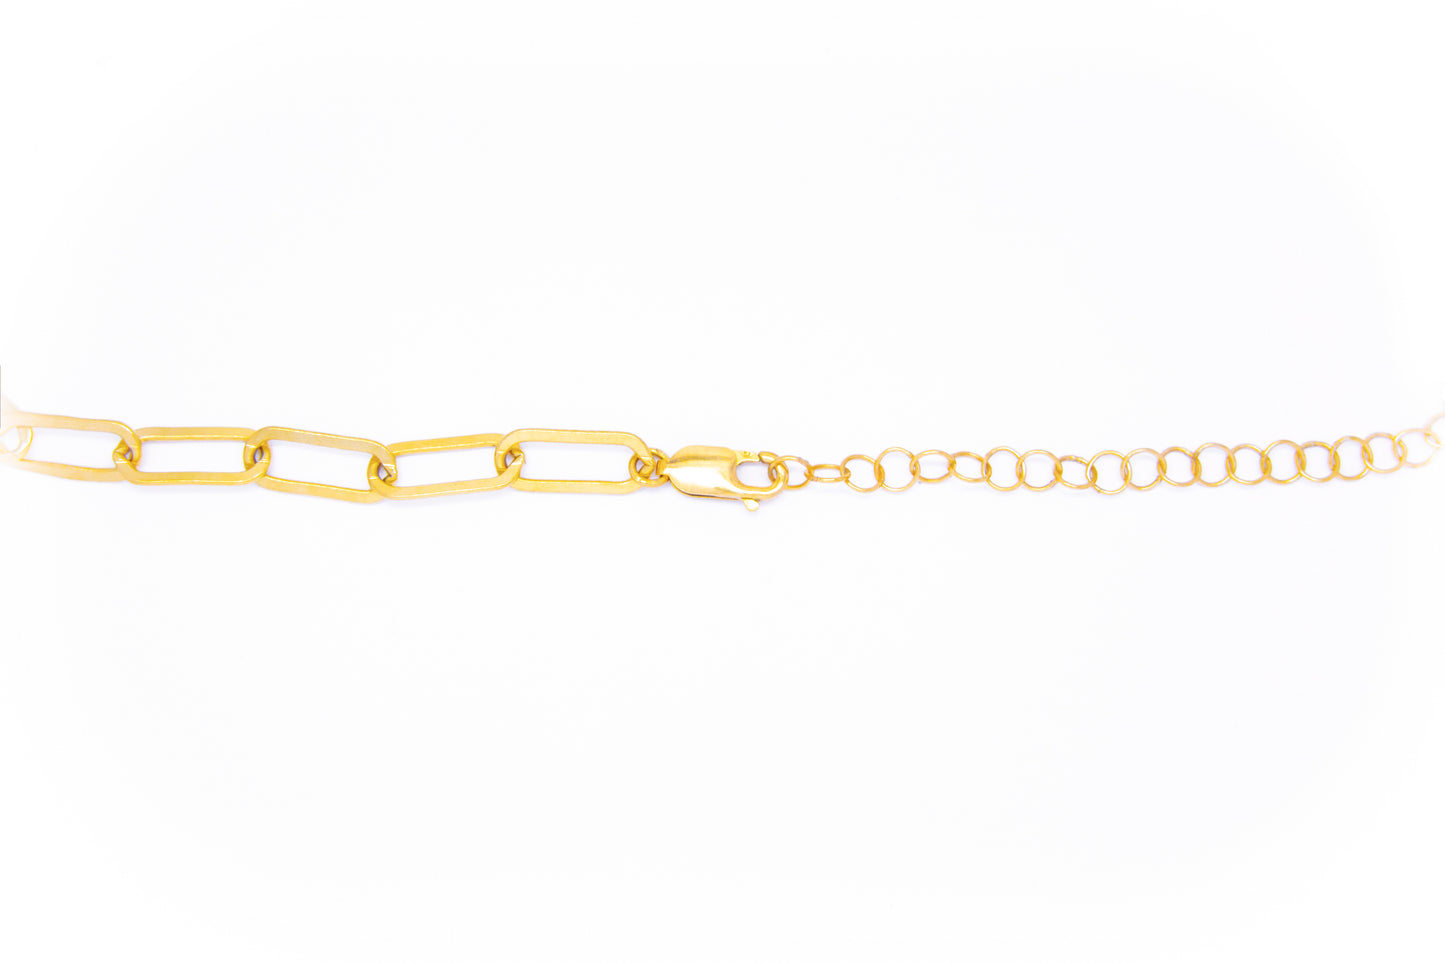 Large Oval Link Chain Necklace